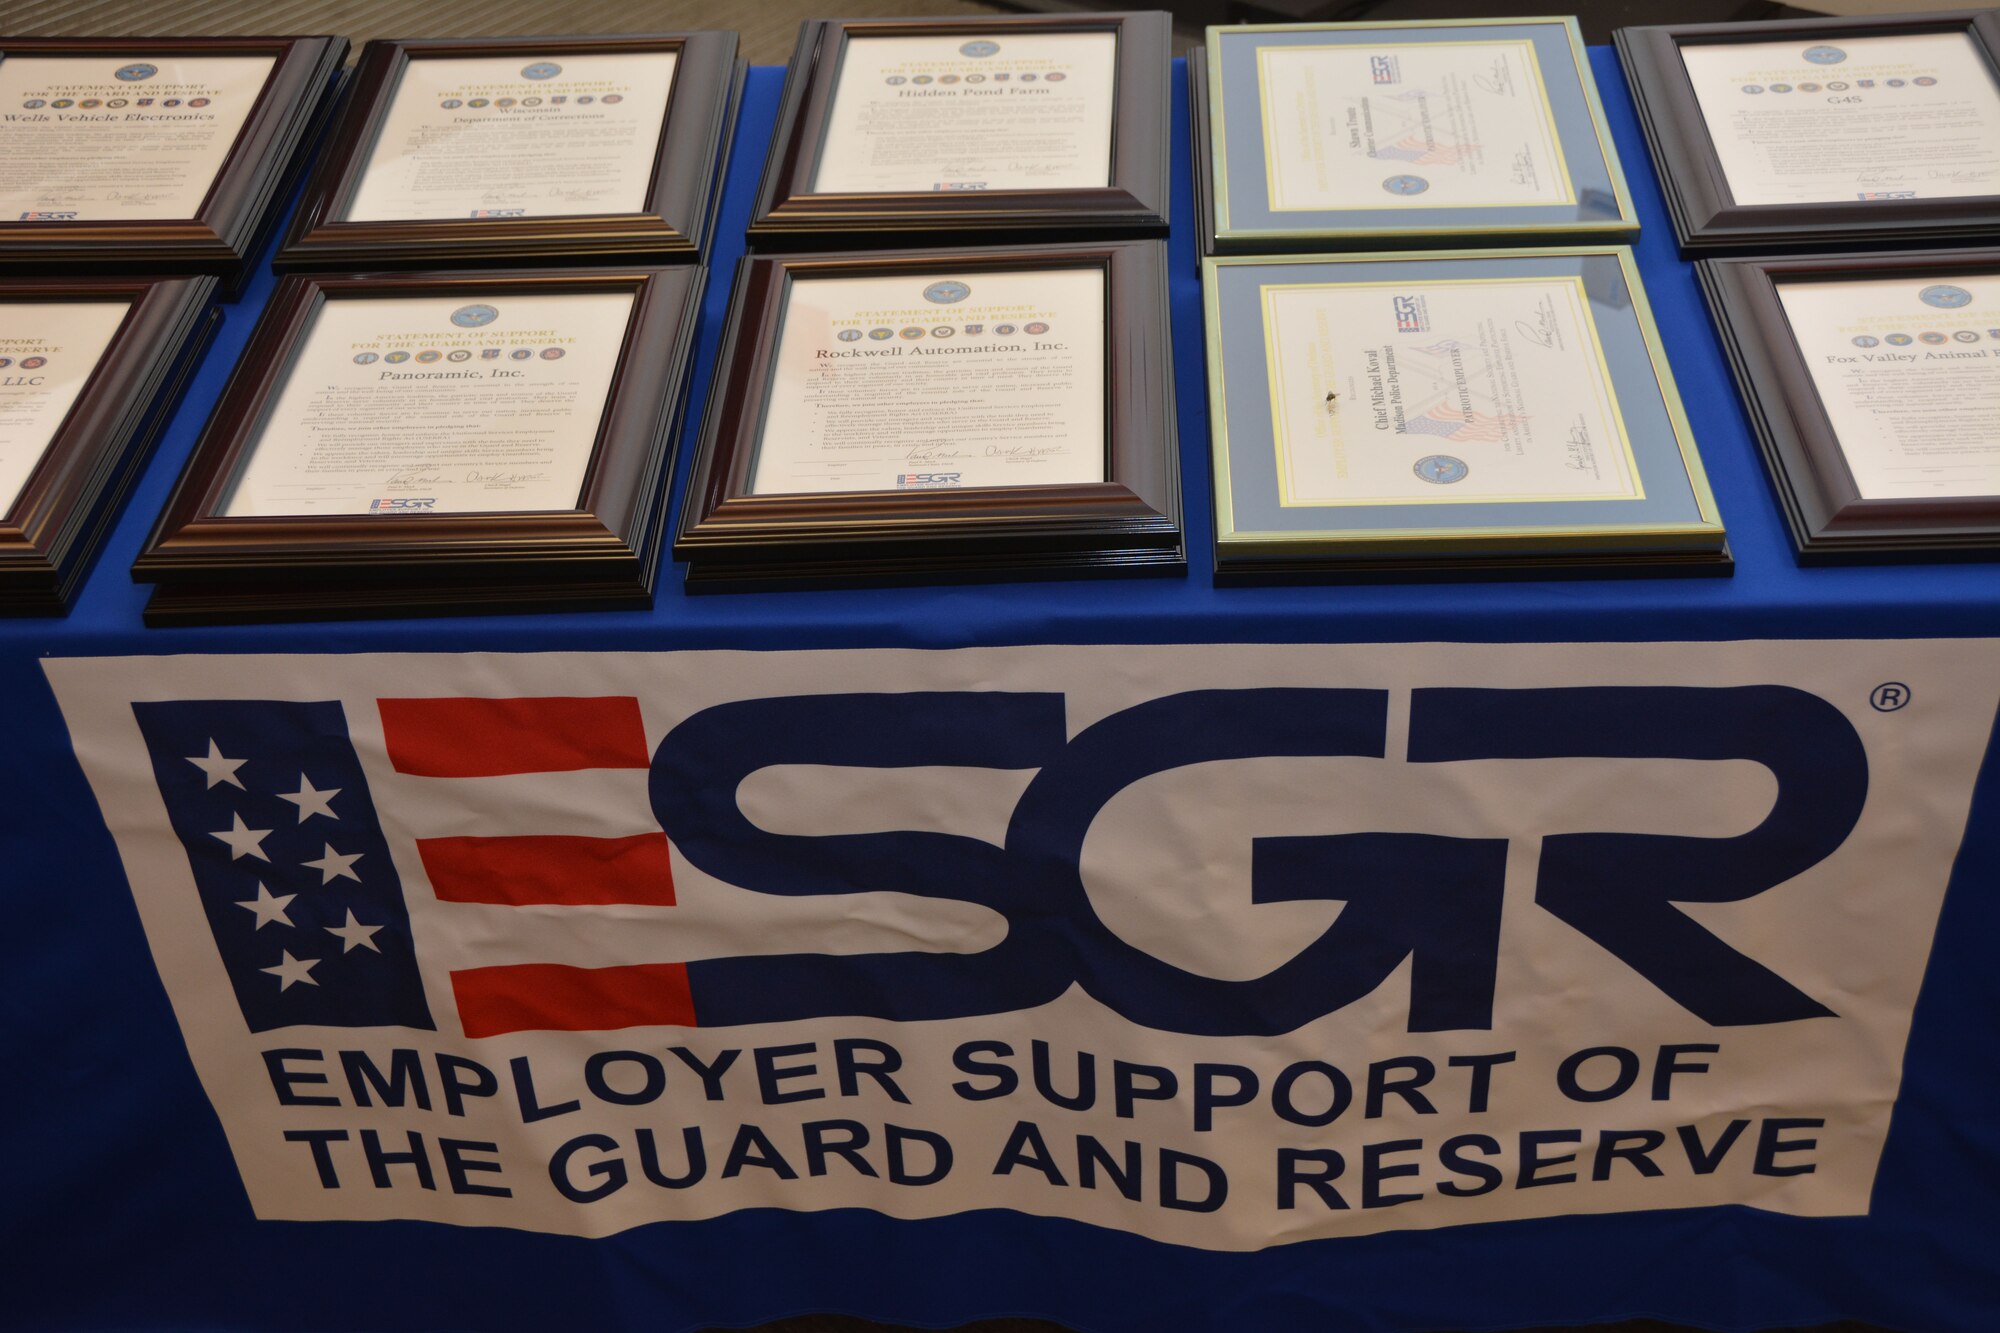 Approximately 70 employers and employees from the Madison area attended an Employer Support of the Guard and Reserve event Sept. 5 at the 115th Fighter Wing, Madison, Wis., recognizing employers who went above and beyond in their support of the Guard and Reserve members.(Air National Guard photo by Staff Sgt. Ryan Roth, released)